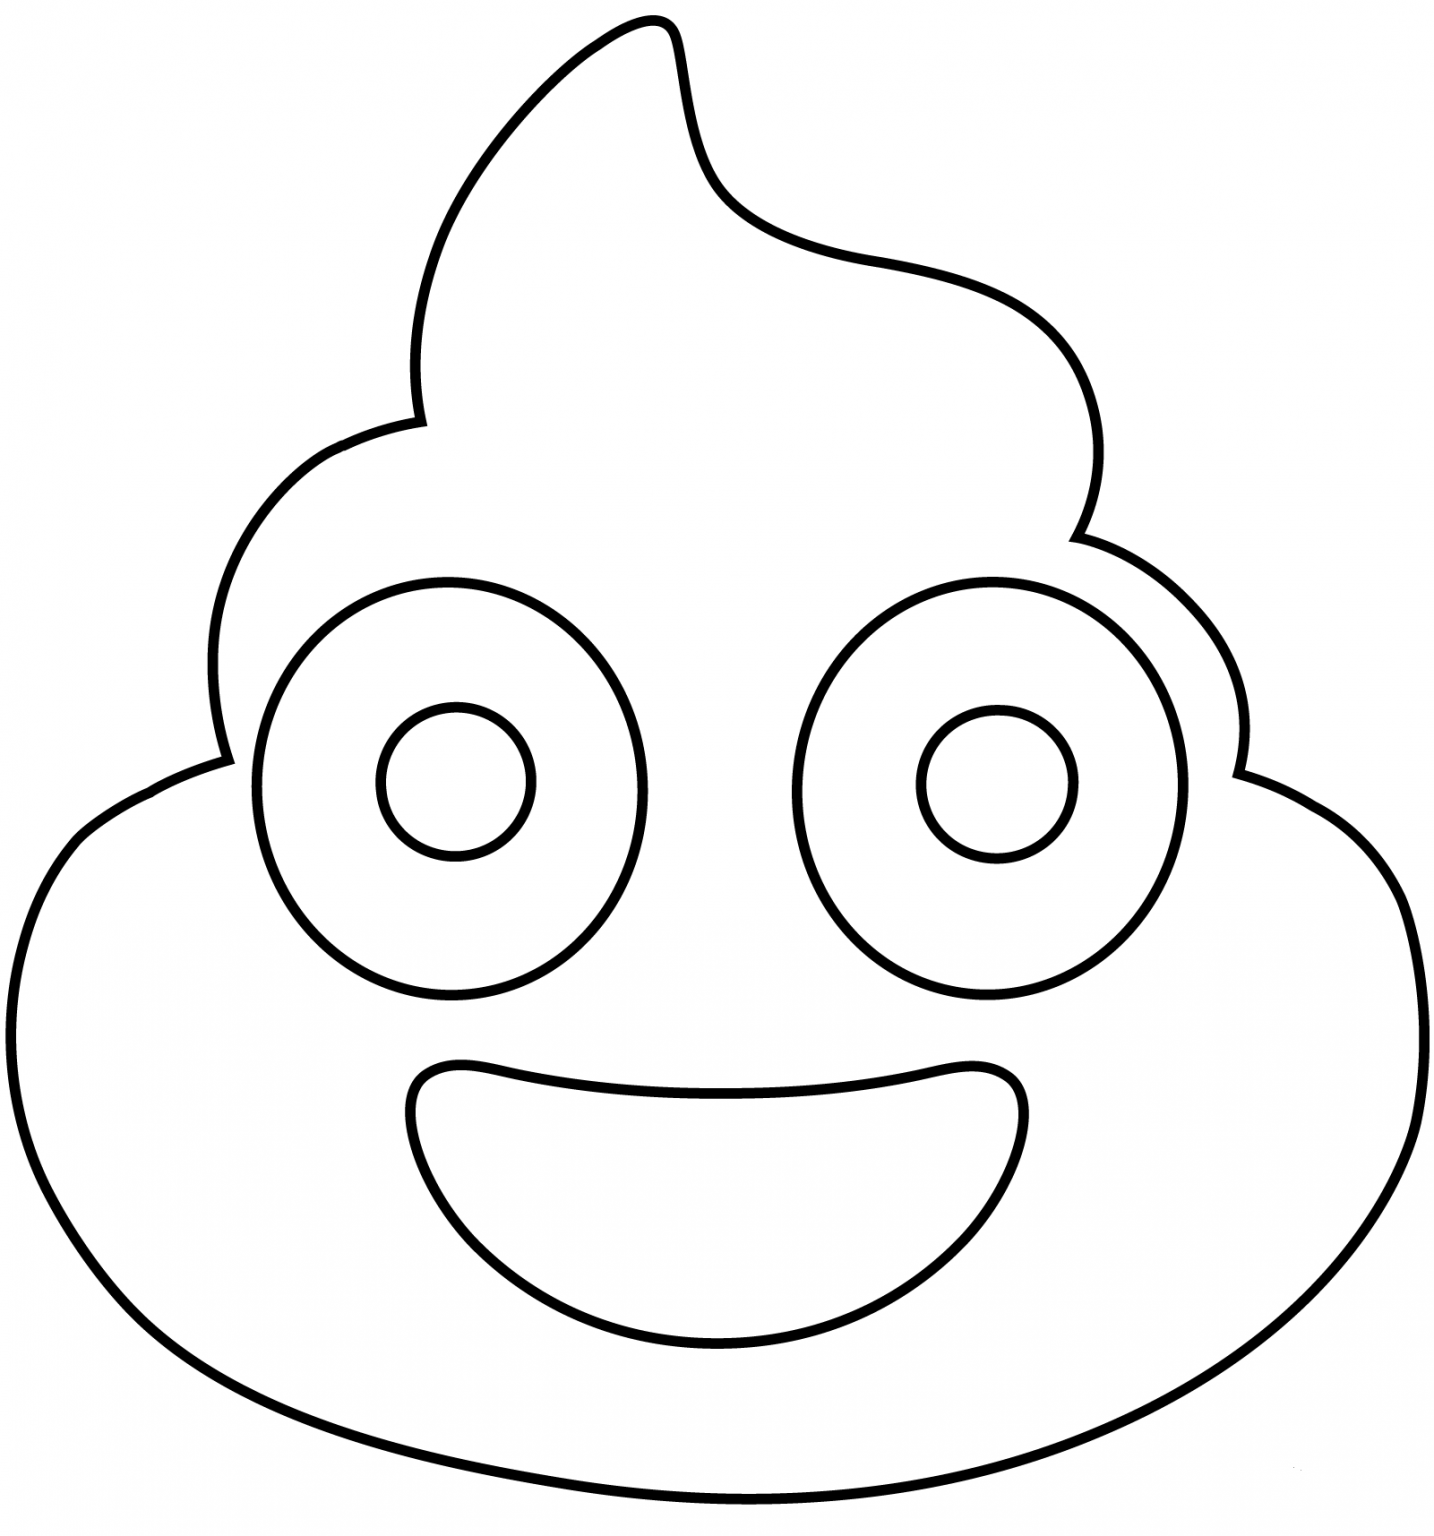 Pile of Poo Emoji coloring page - ColouringPages